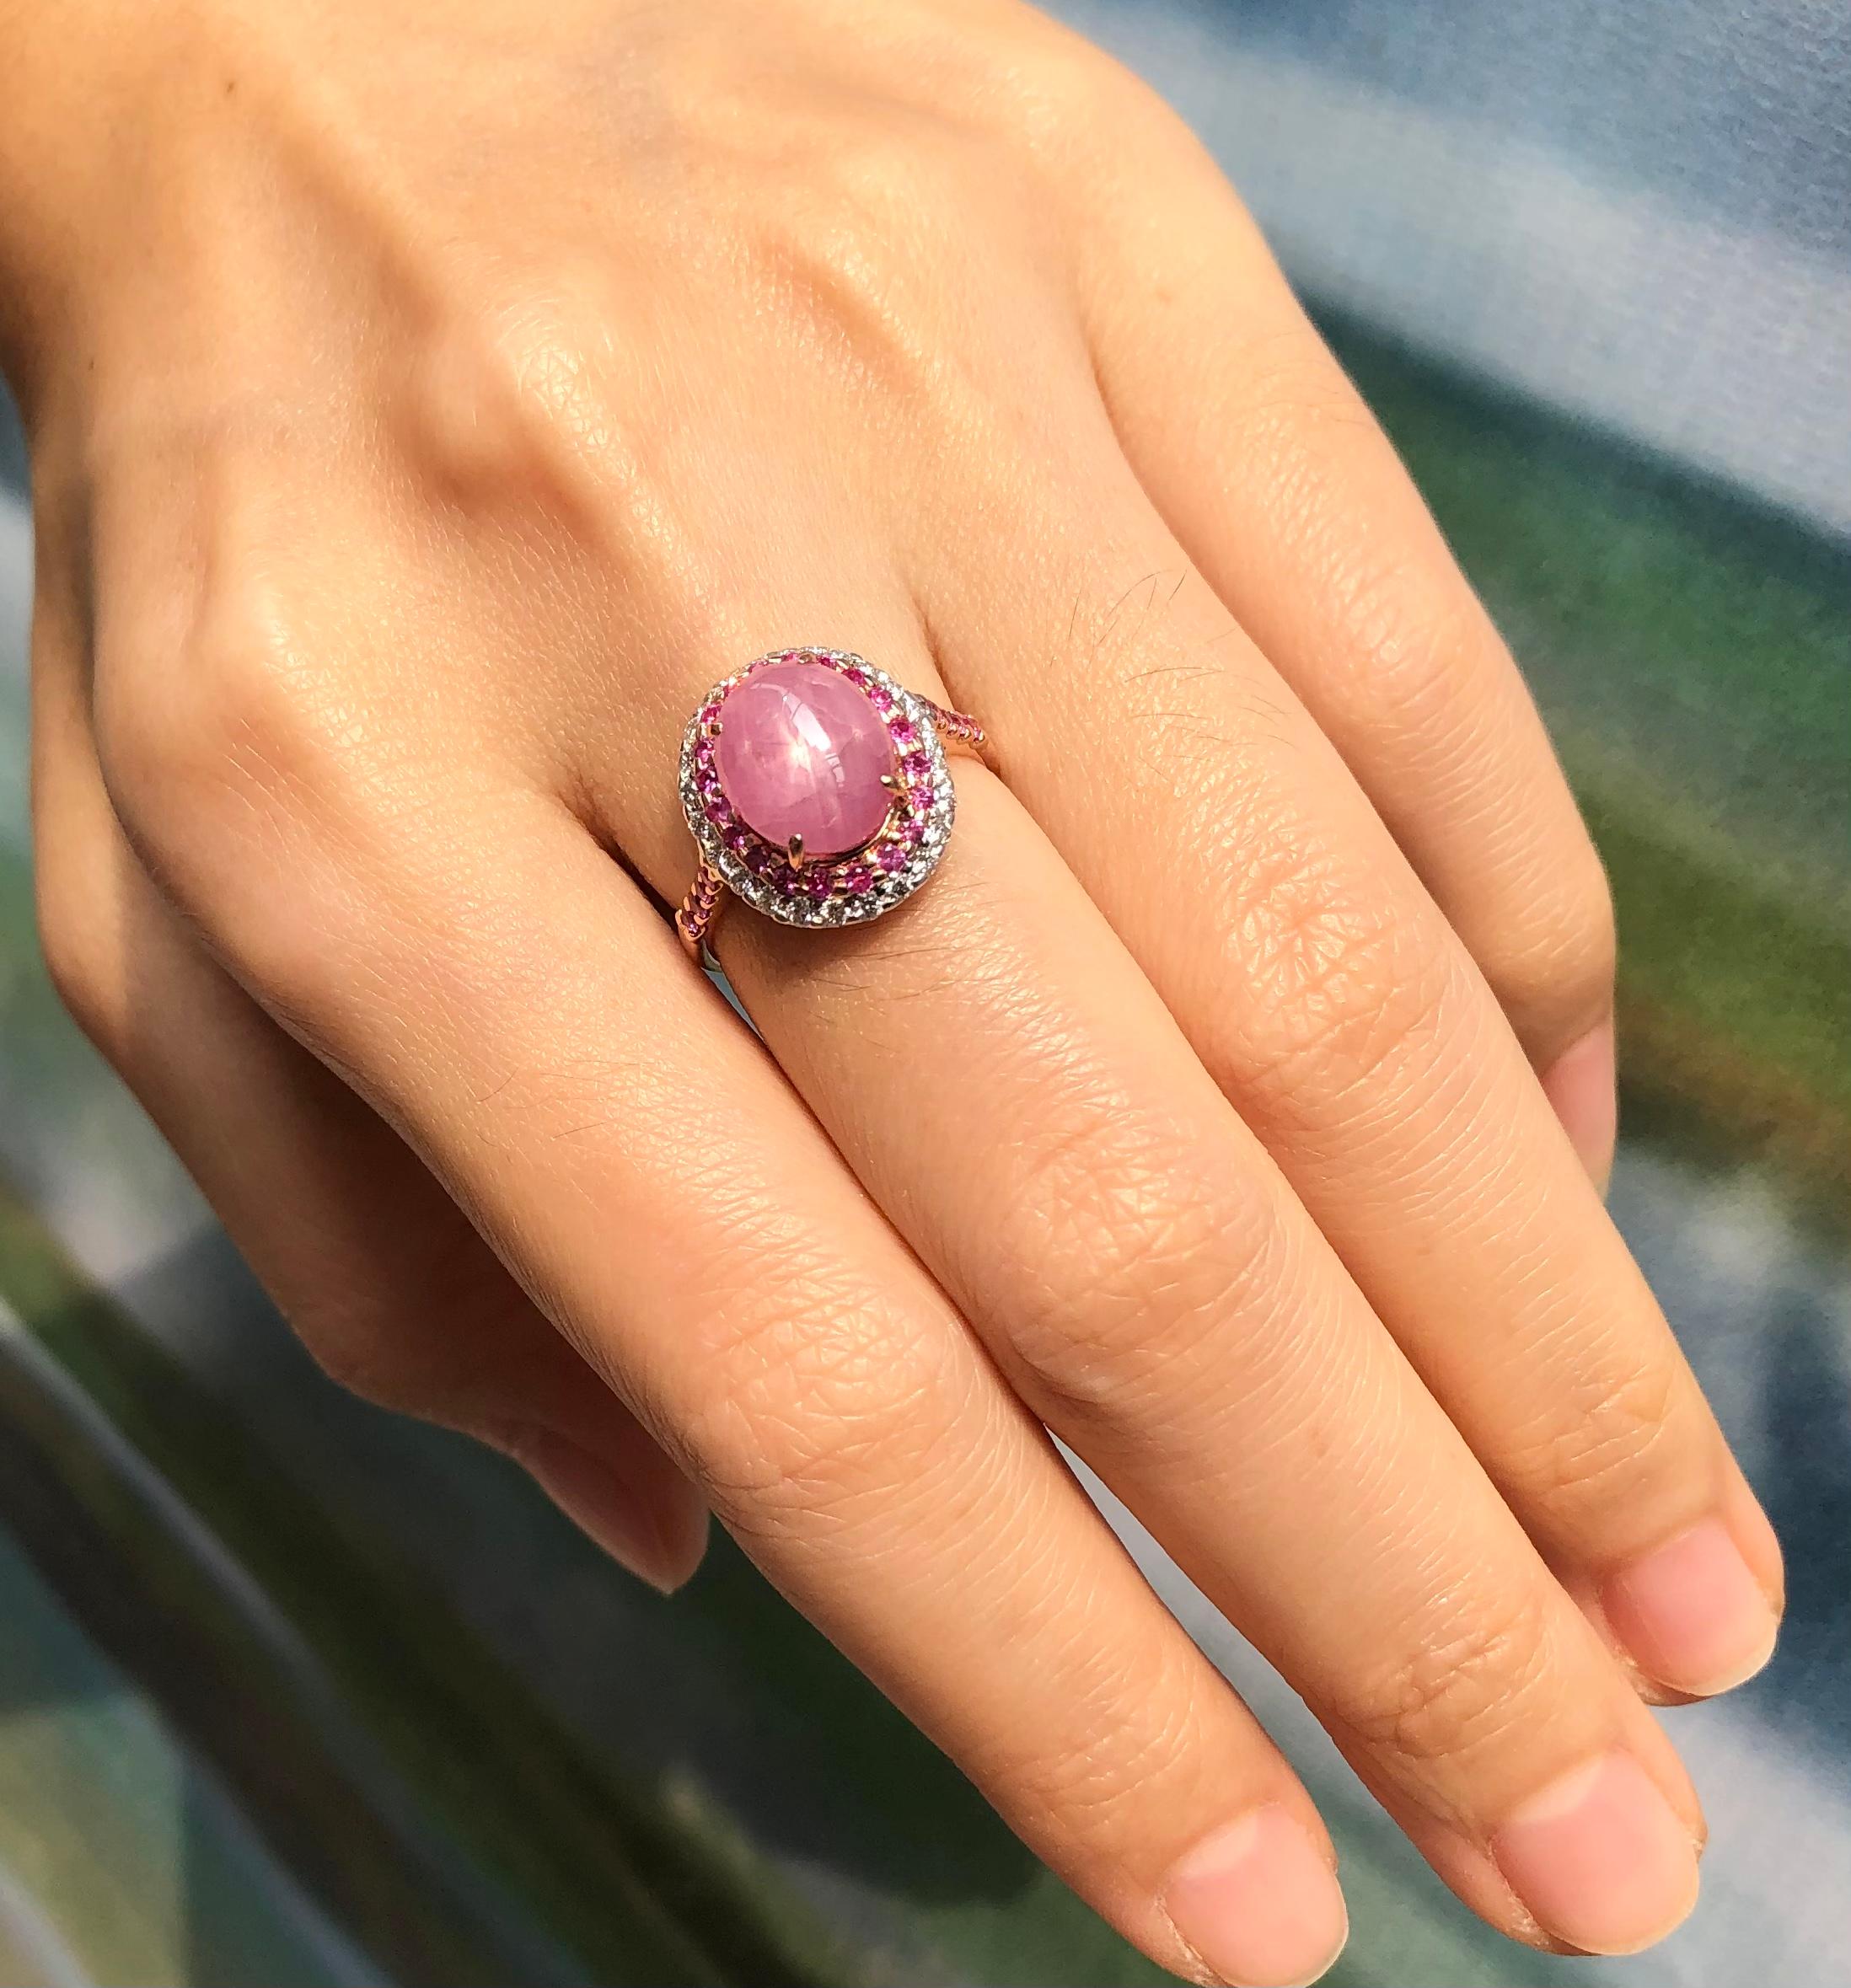 Cabochon Certified Unheated Star Pink Sapphire, Diamond Ring in 18K Rose Gold For Sale